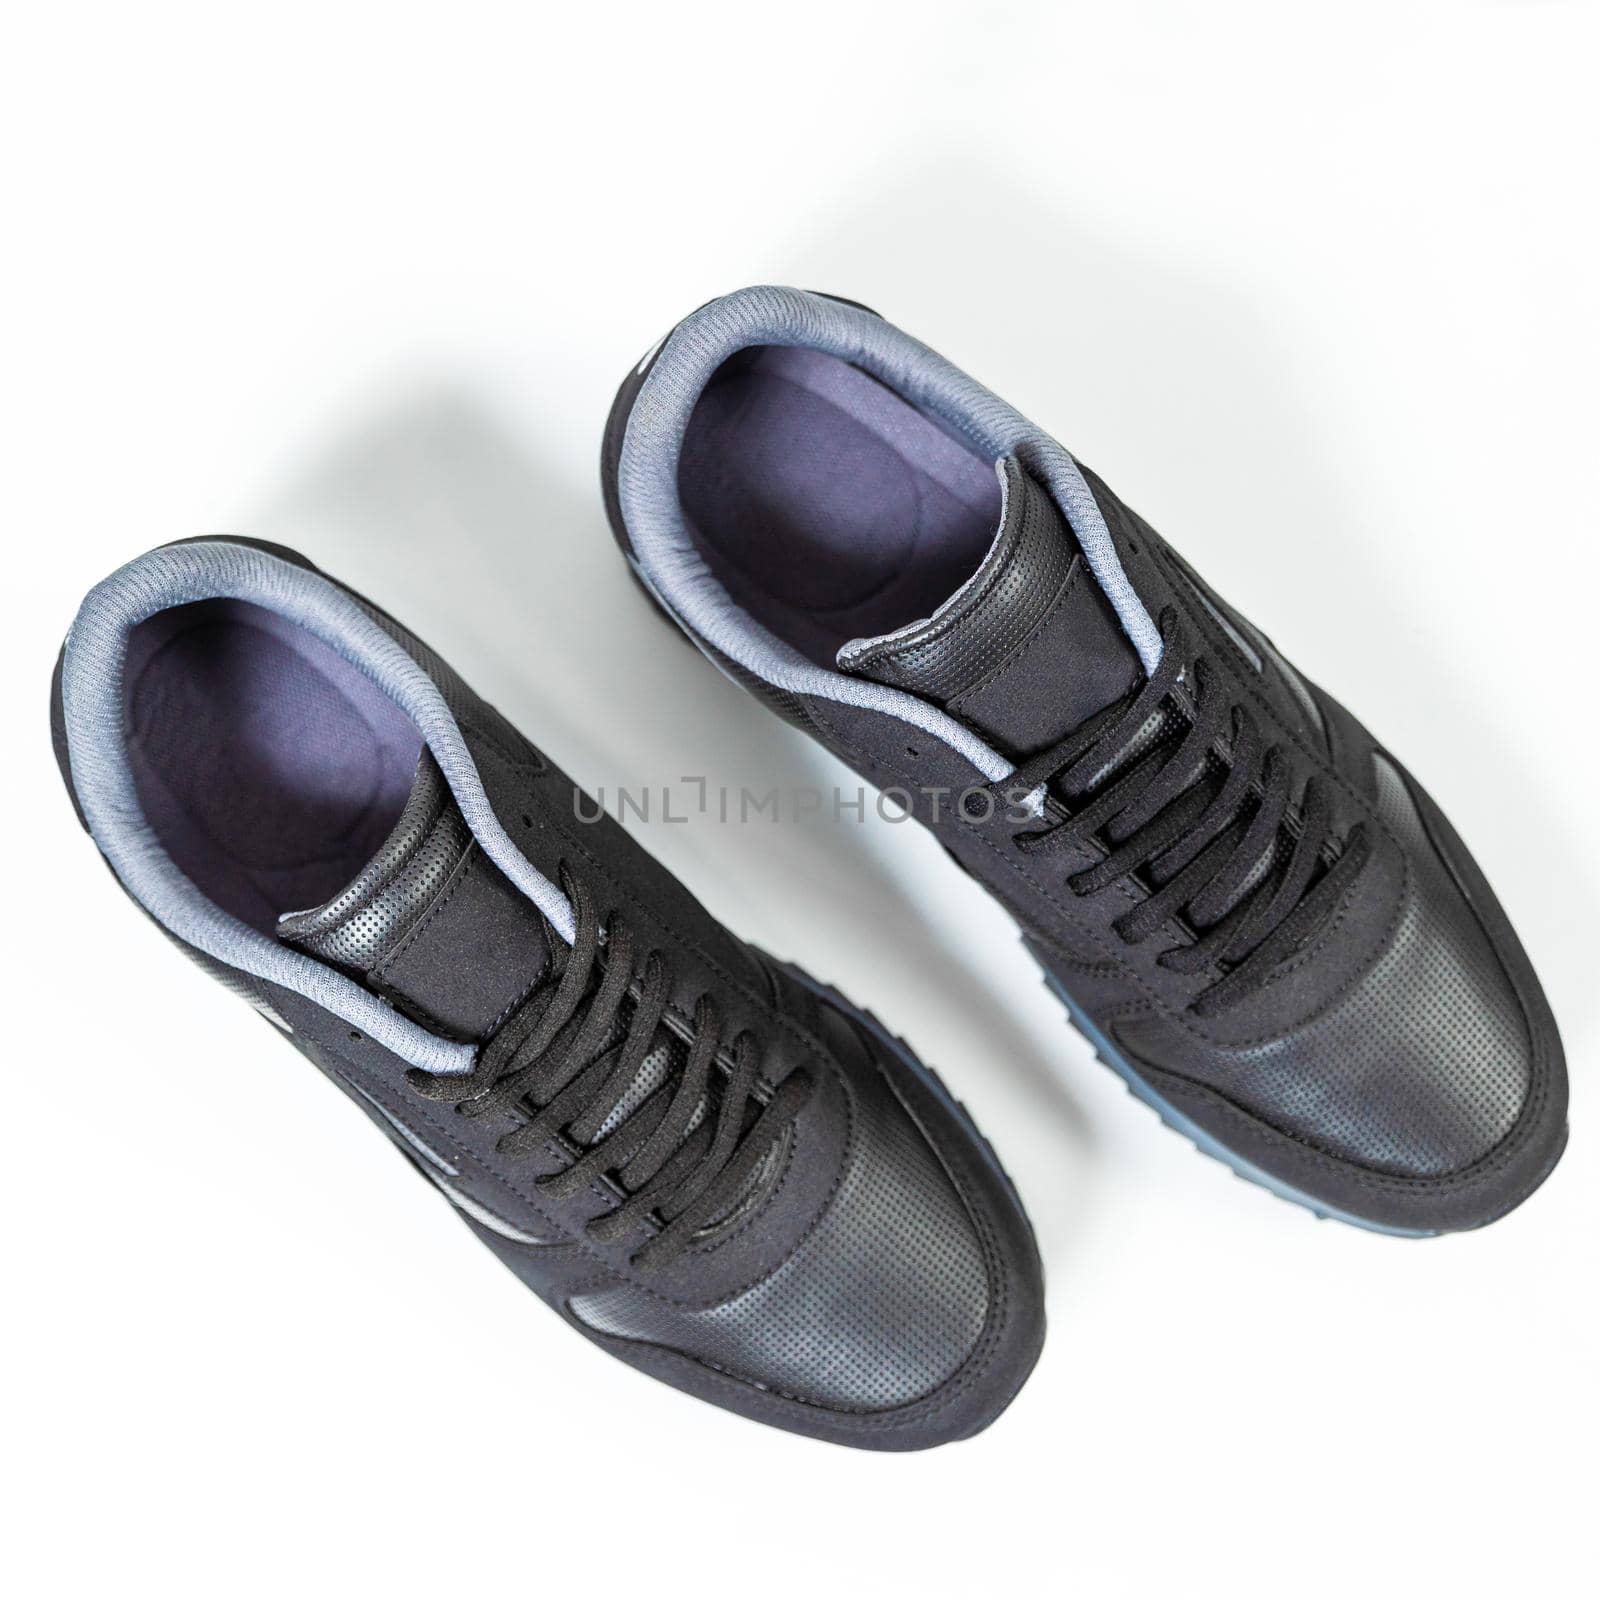 Black male sneakers shoes isolated background top view by ferhad